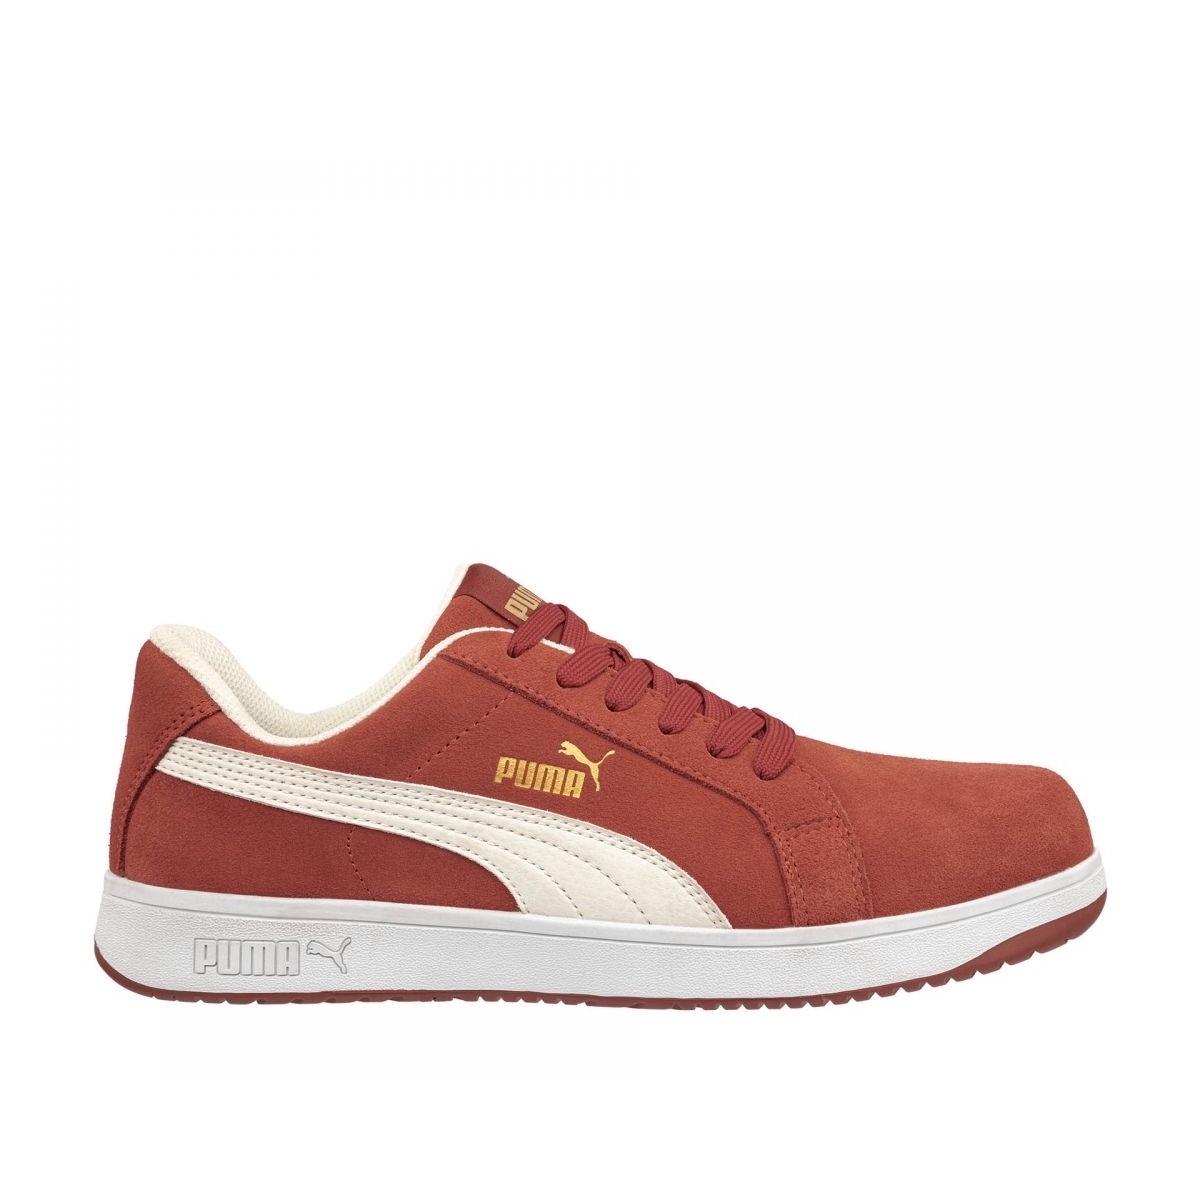 PUMA Safety Men's Iconic Low Composite Toe EH Work Shoes Red Suede - 640045 ONE SIZE RED - RED, 9